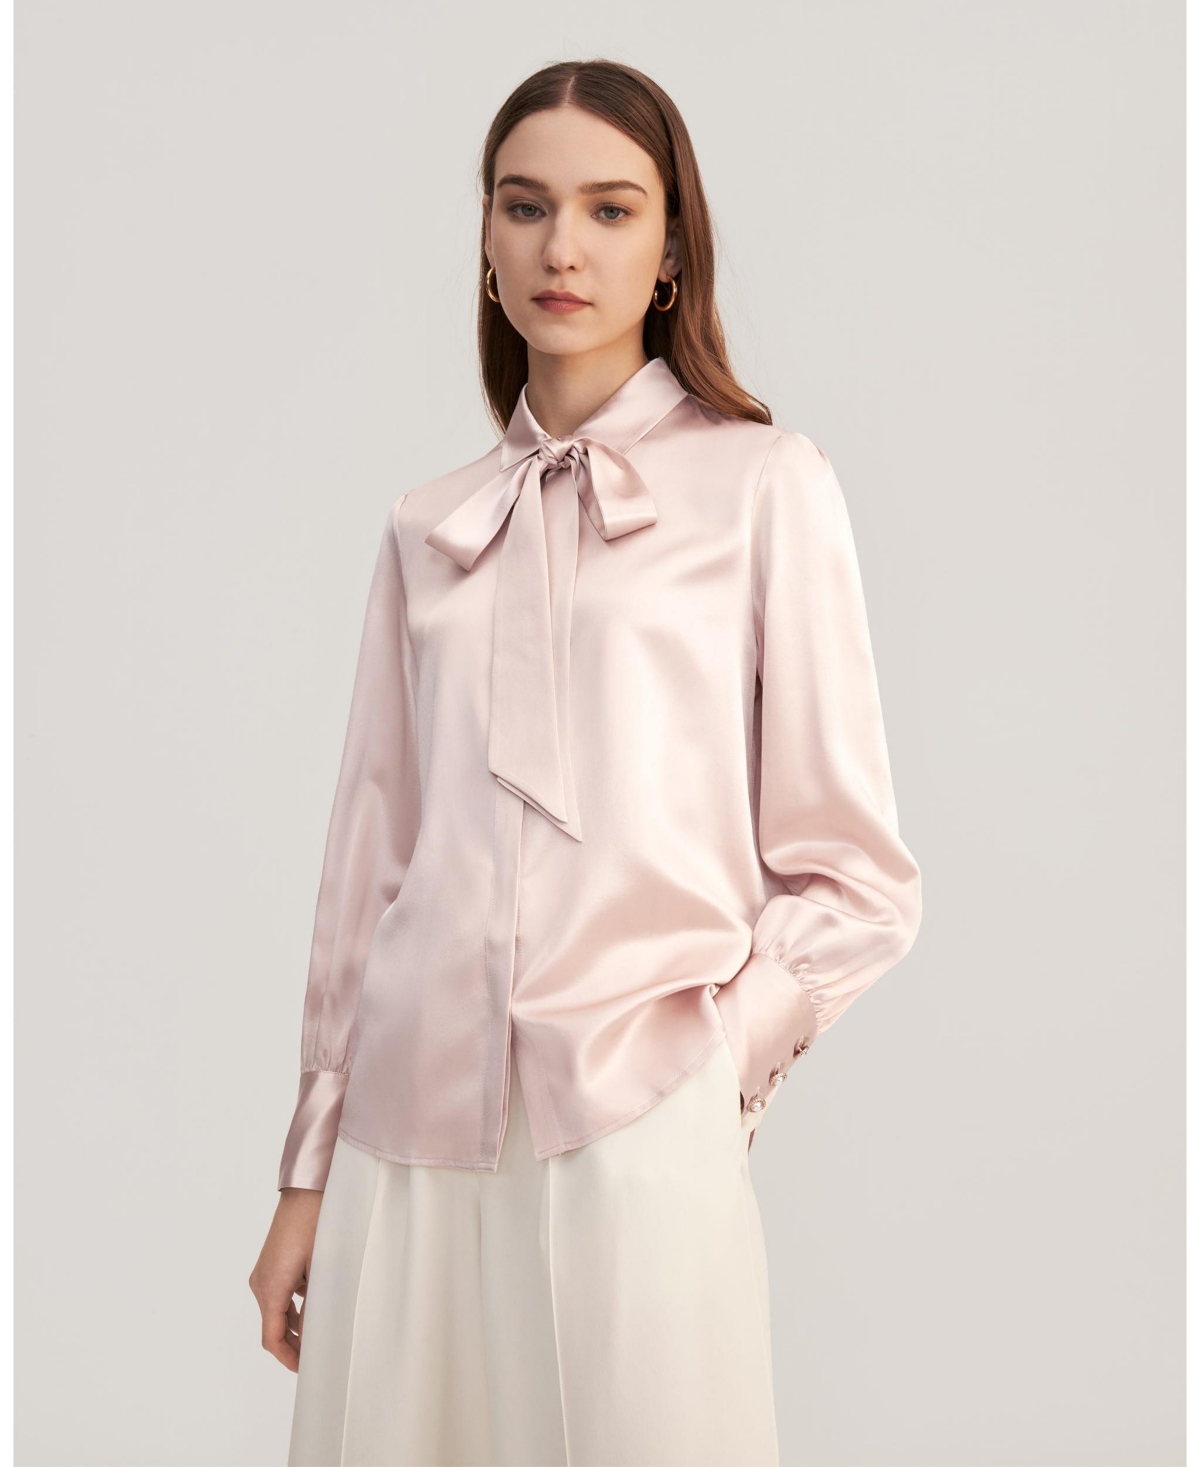 Vintage Bow Tie Silk Blouse for Women - Pale pink